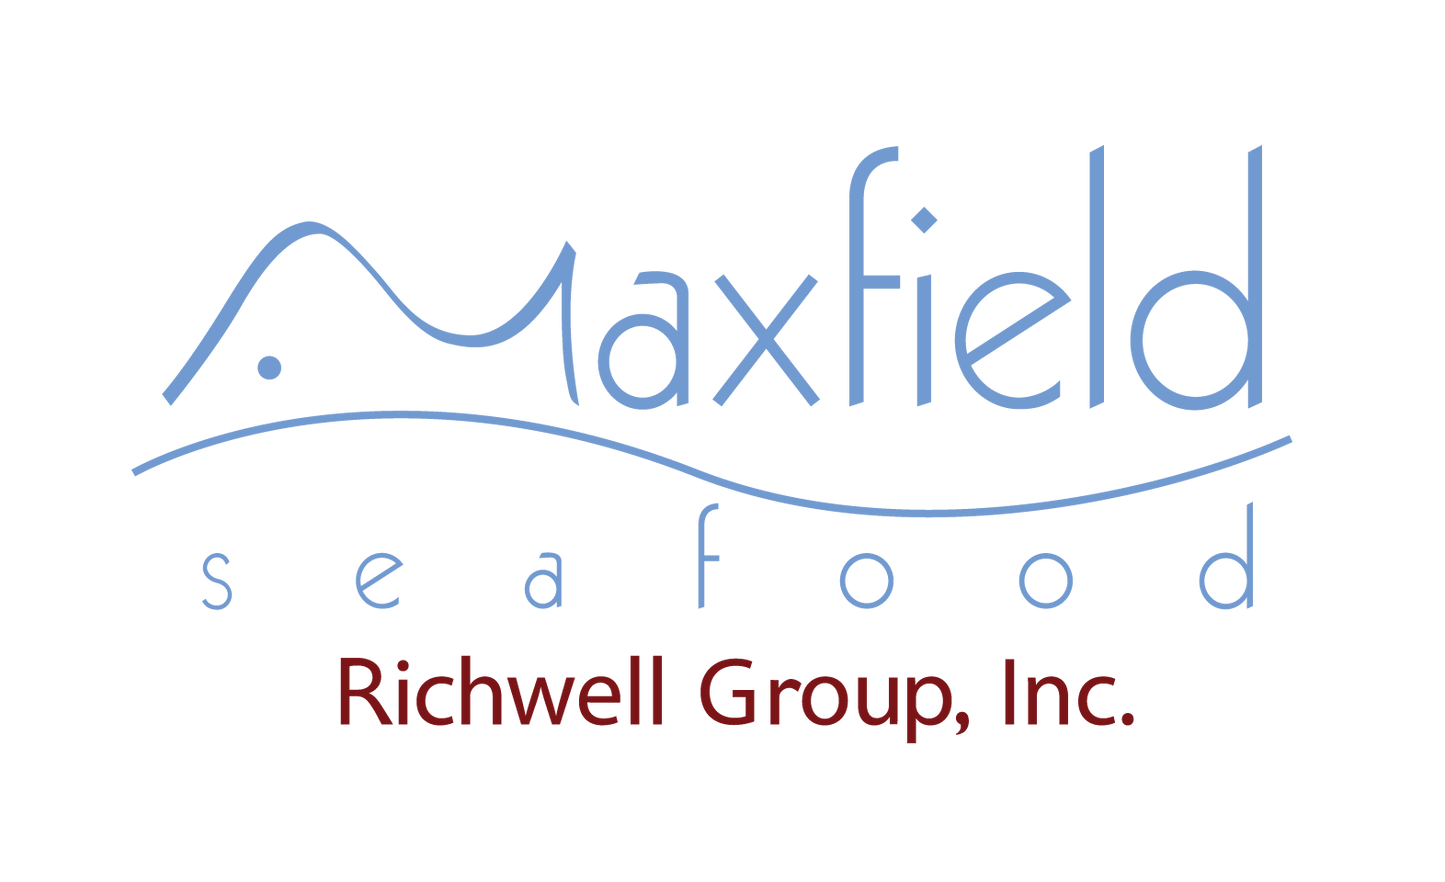 Richwell Group